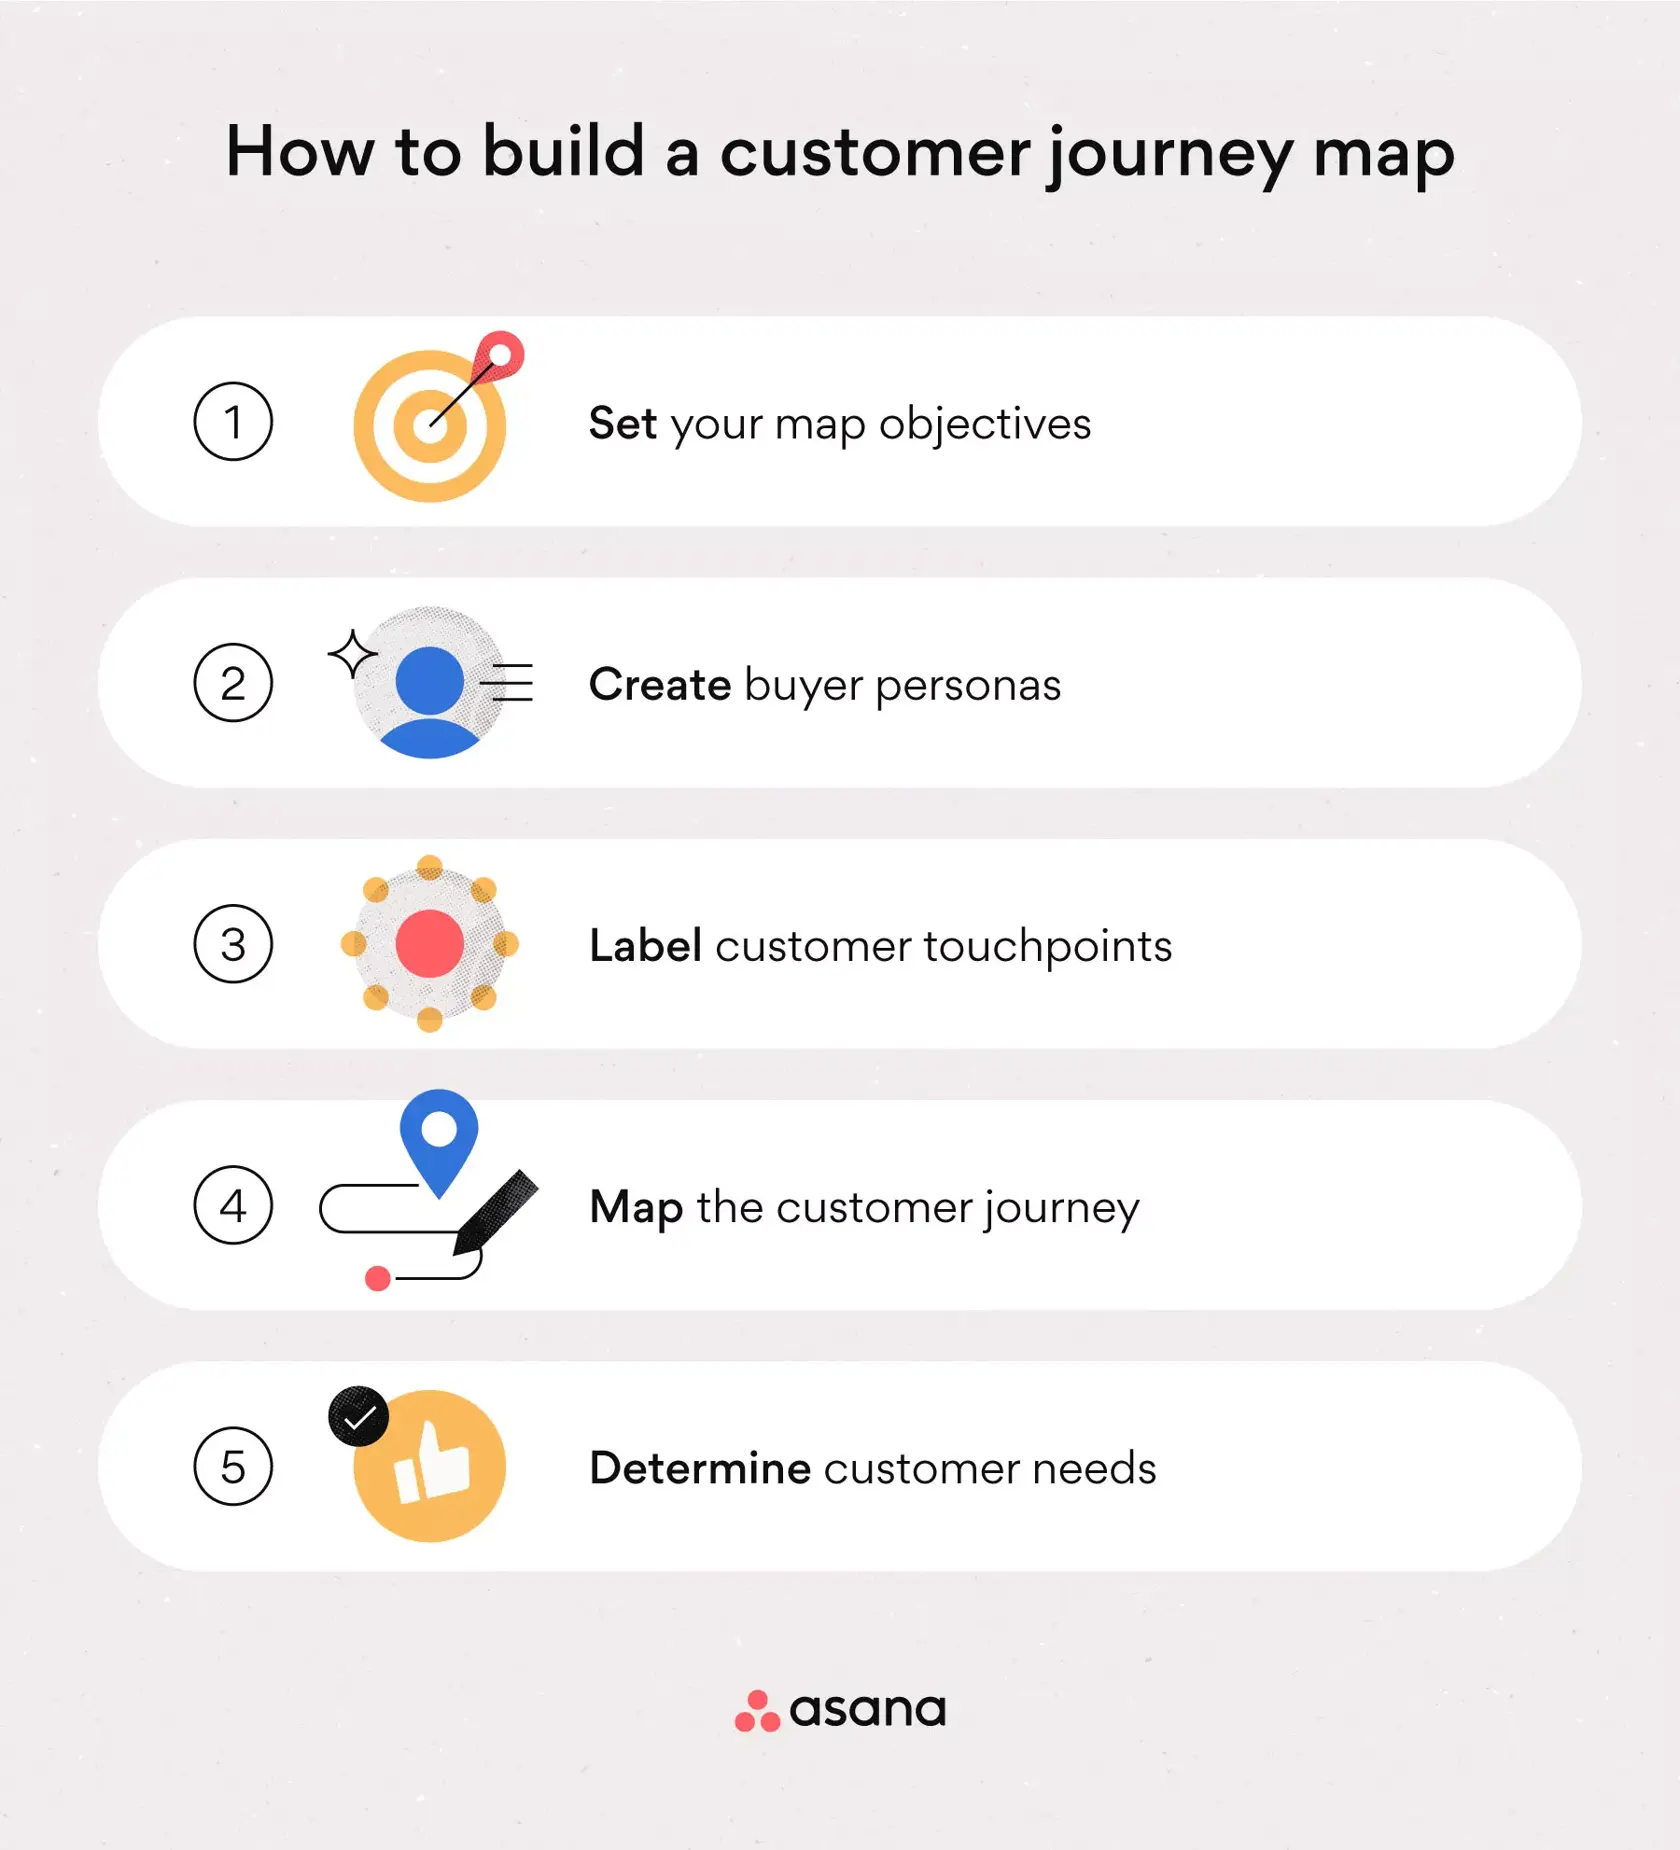 [inline illustration] How to build a customer journey map (infographic)